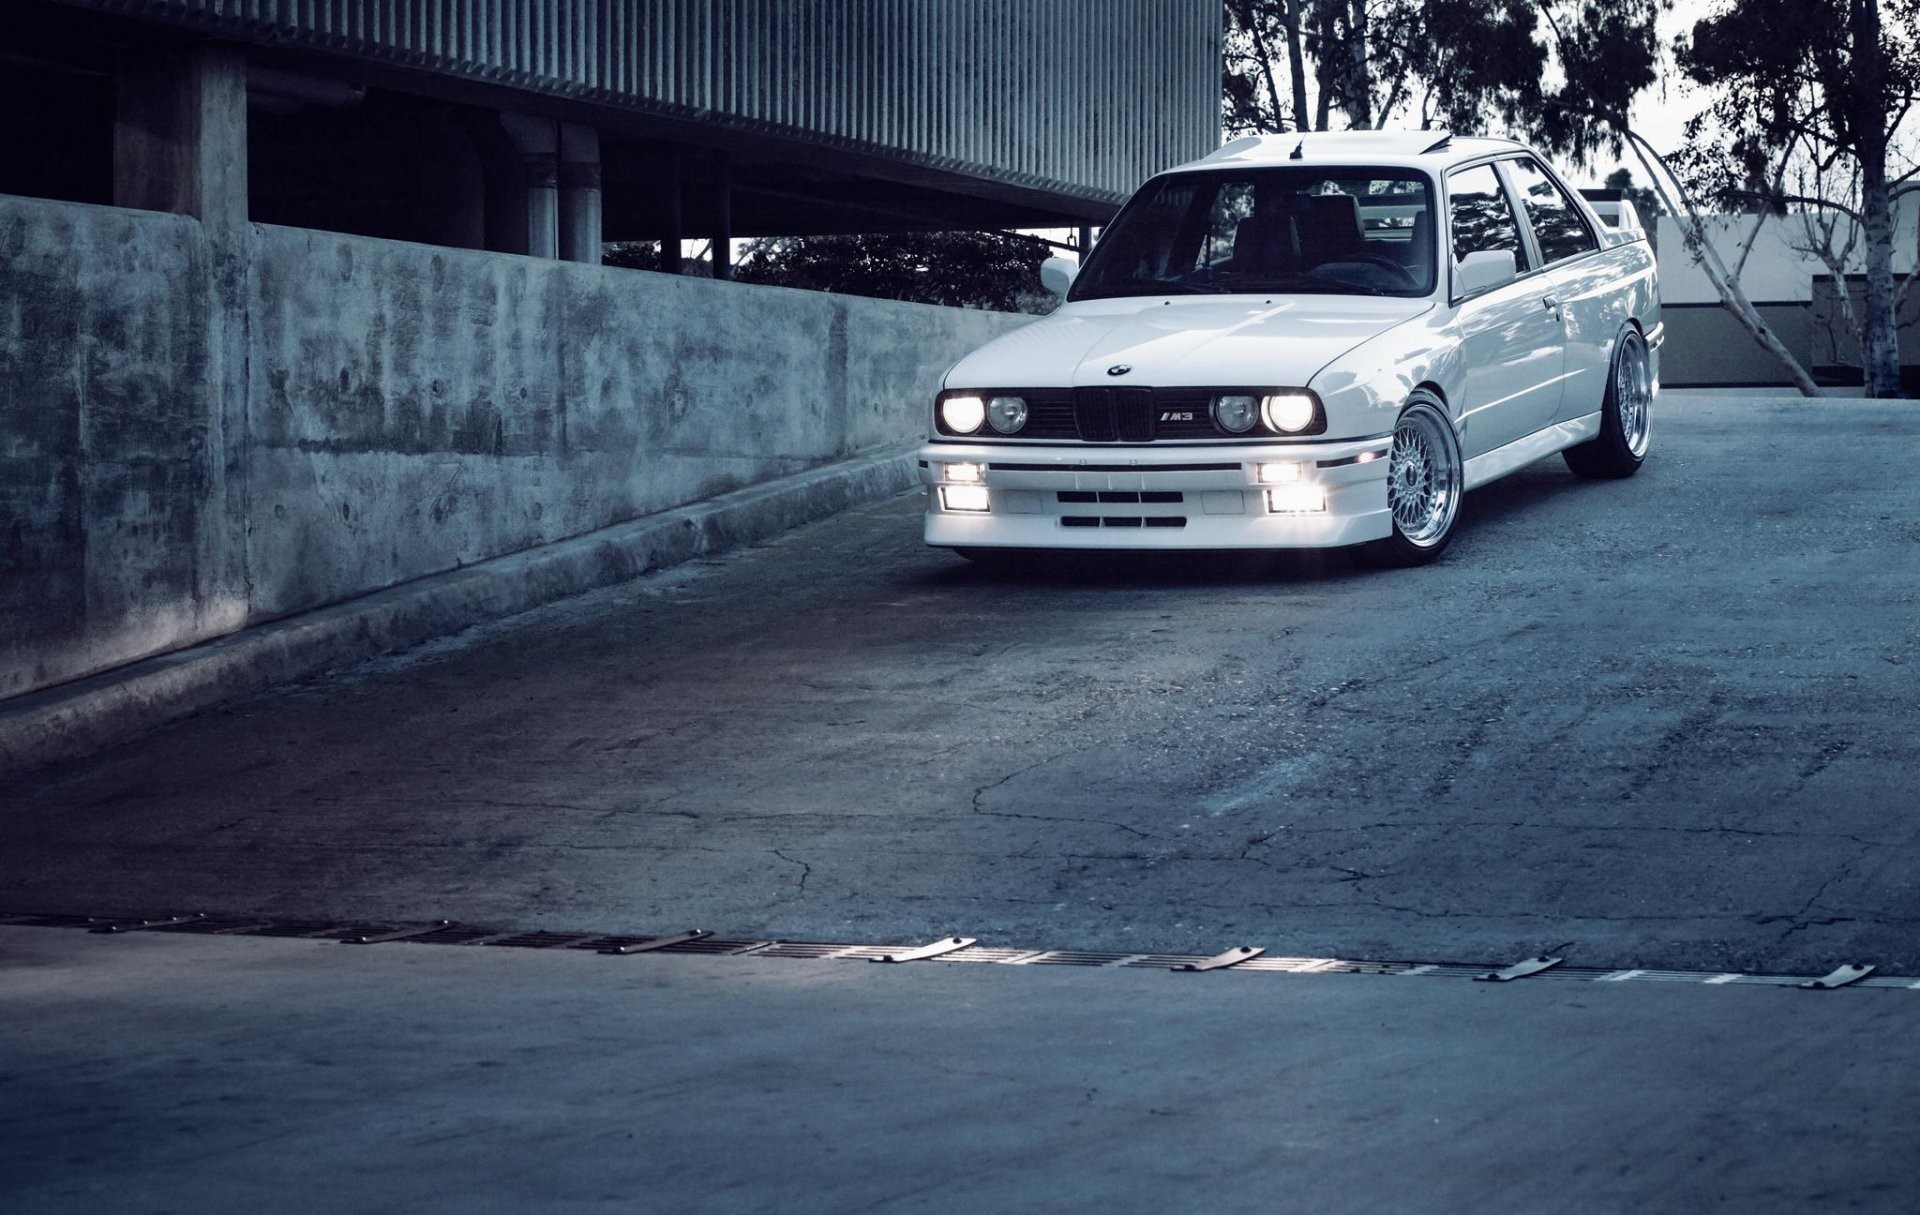 BMW E30 M3 wallpaper by Kerimclskn  Download on ZEDGE  17f6